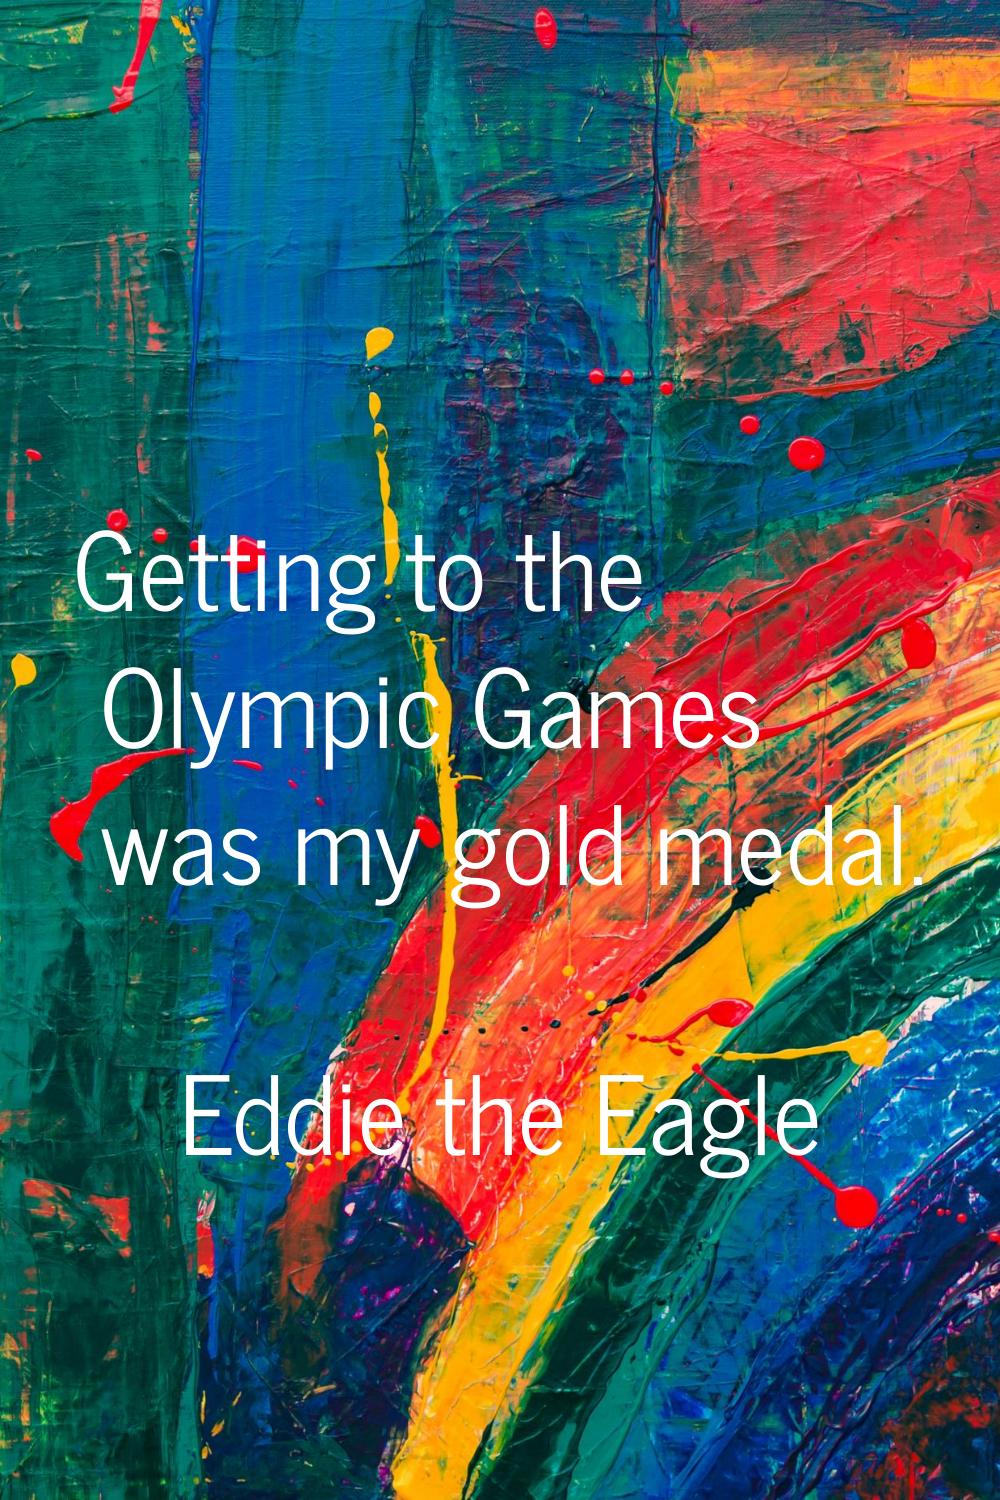 Getting to the Olympic Games was my gold medal.